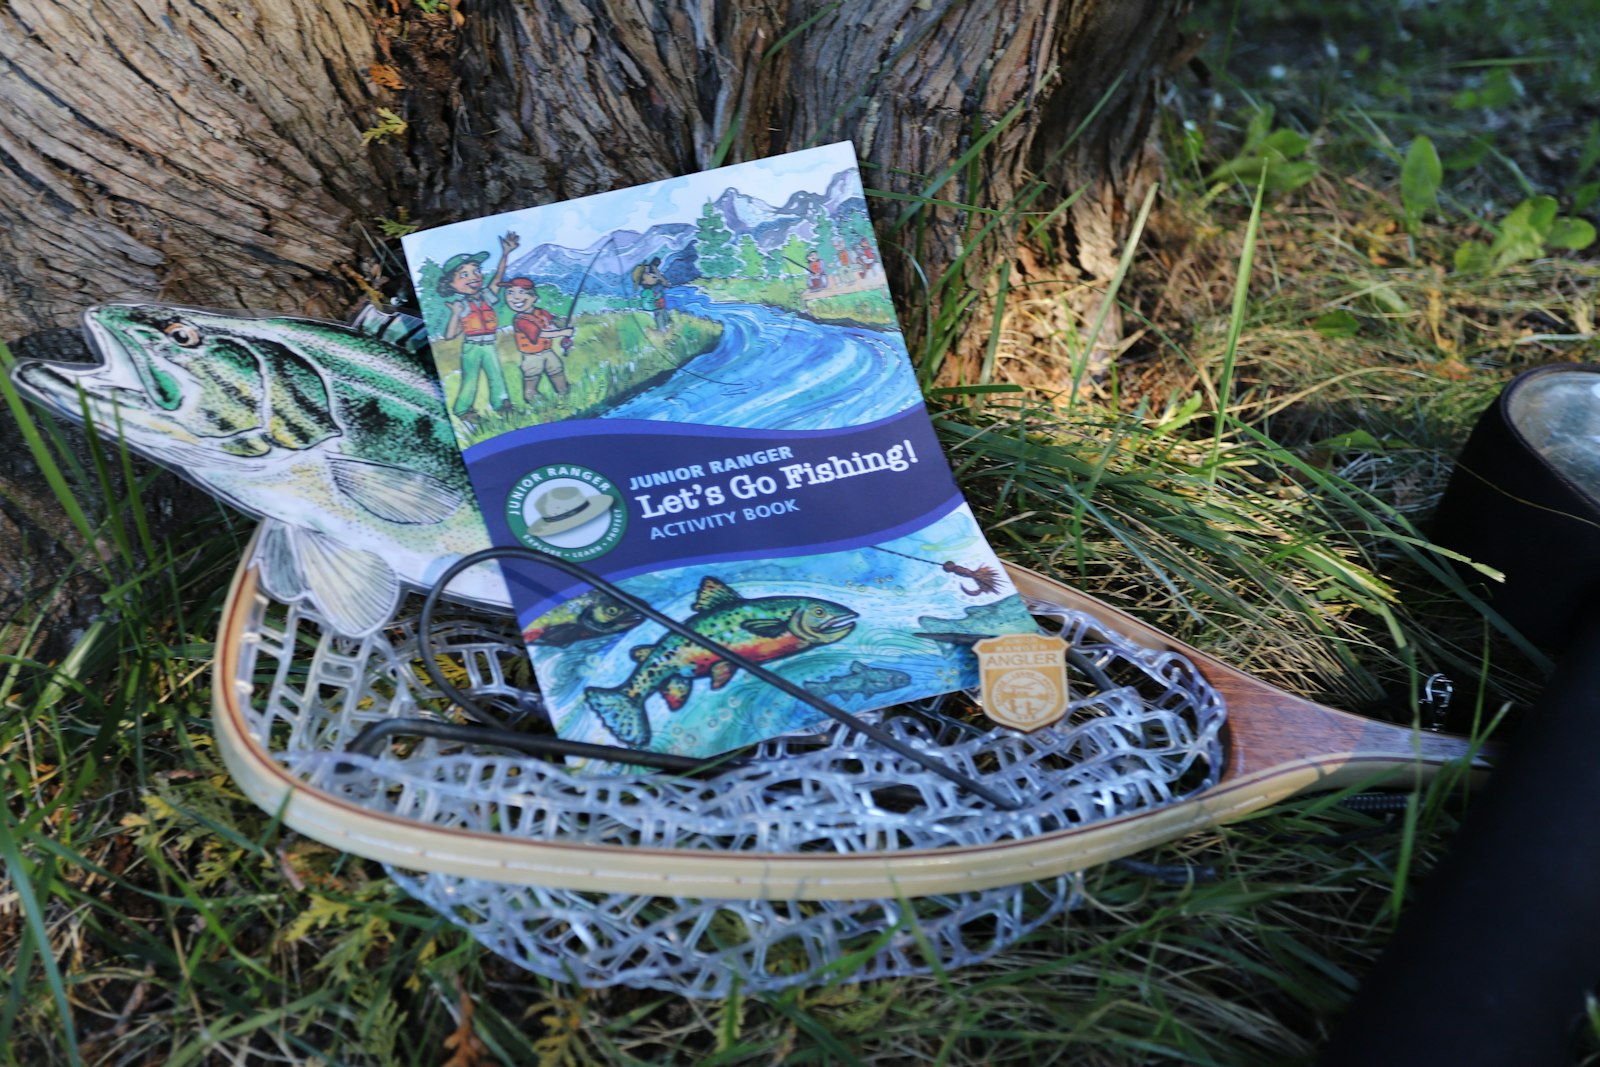 A booklet in a fishing basket. The booklet text reads: "Junior Ranger Let's Go Fishing Activity Book"